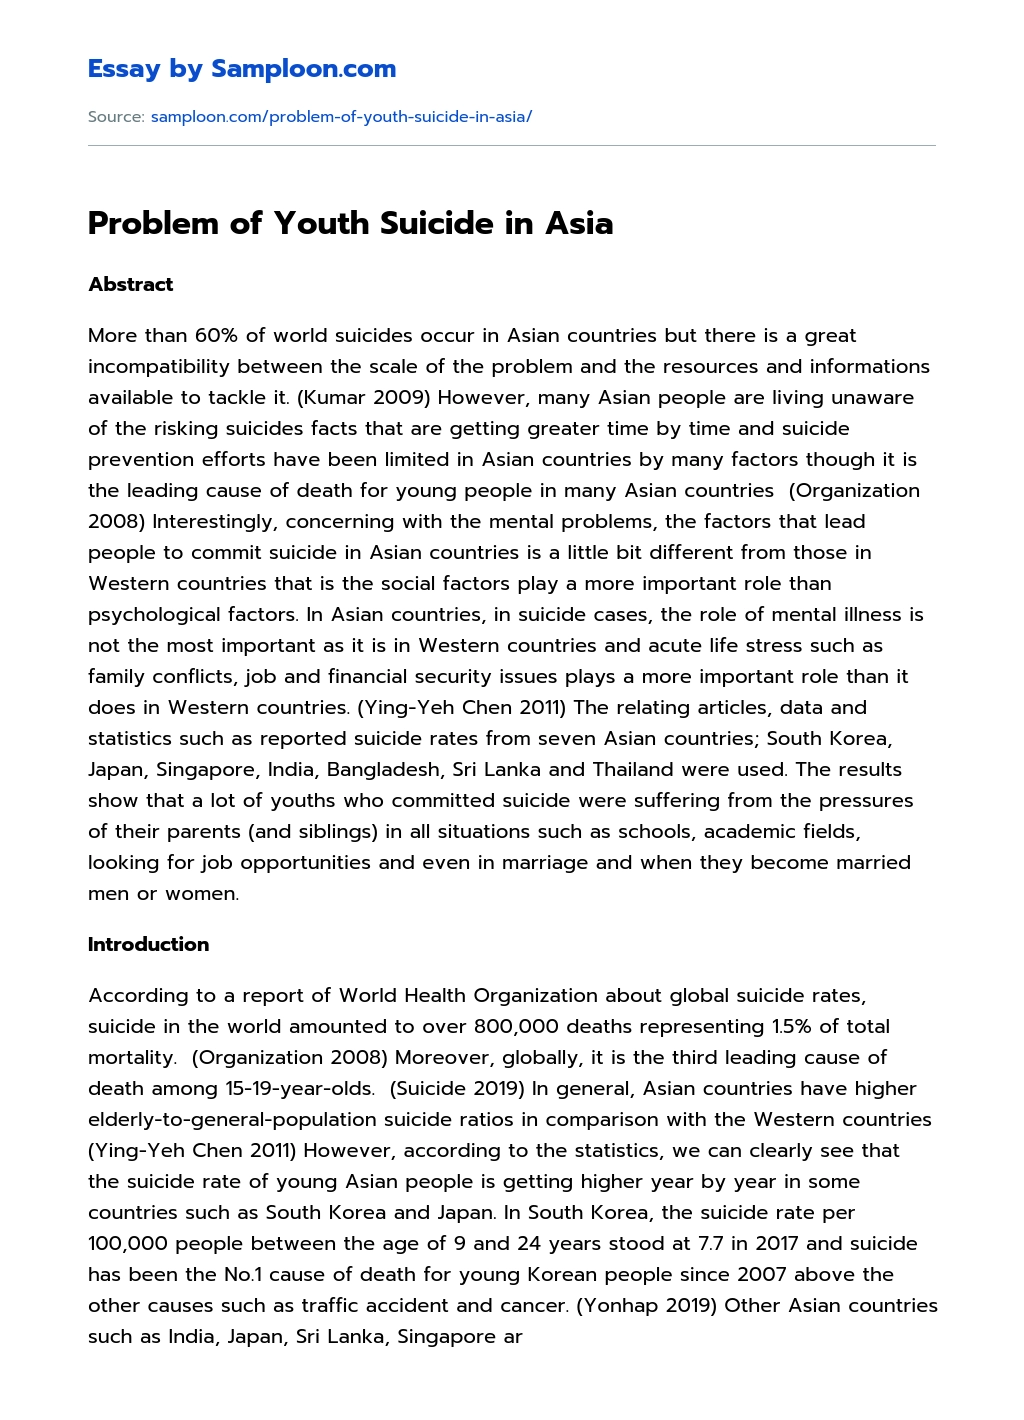 Problem of Youth Suicide in Asia  essay